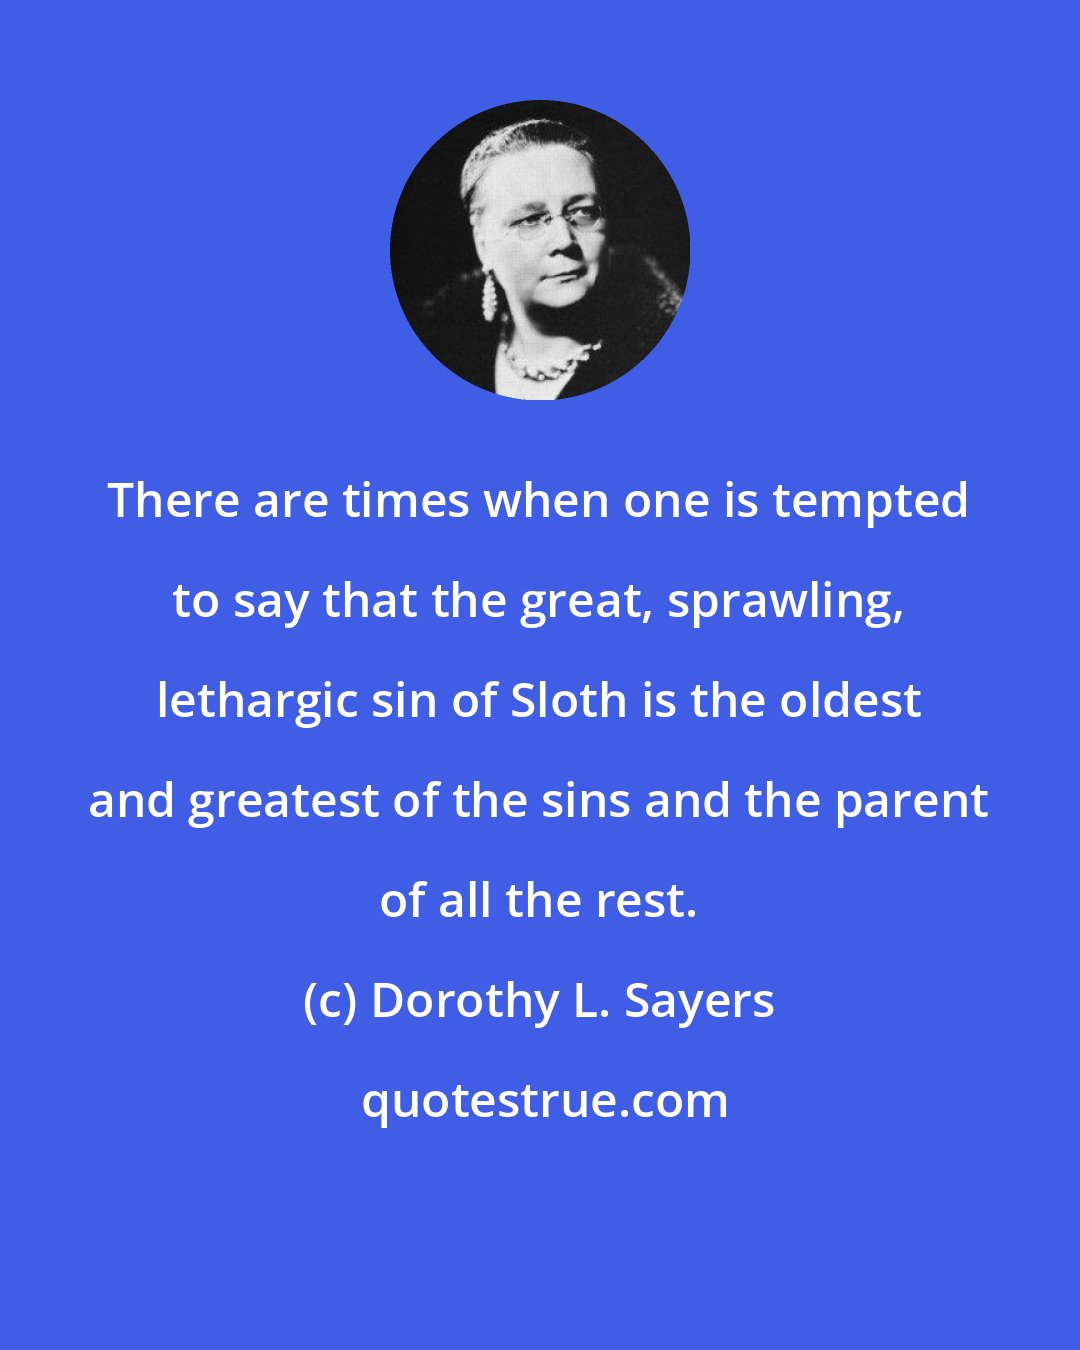 Dorothy L. Sayers: There are times when one is tempted to say that the great, sprawling, lethargic sin of Sloth is the oldest and greatest of the sins and the parent of all the rest.